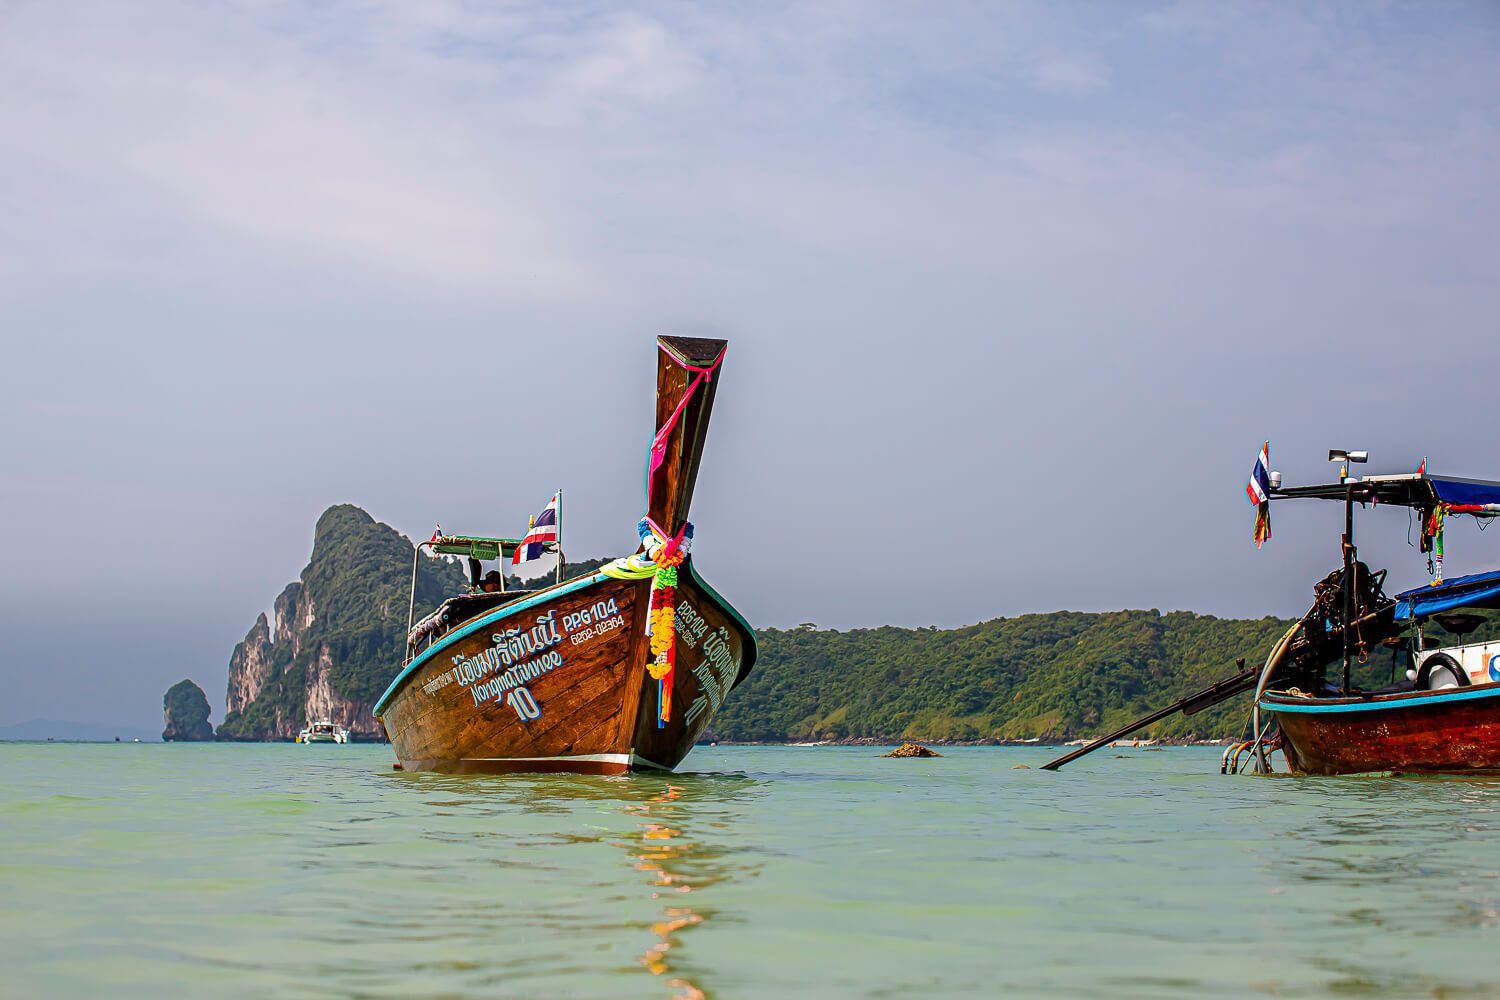 Longtail boats in Koh Phi Phi